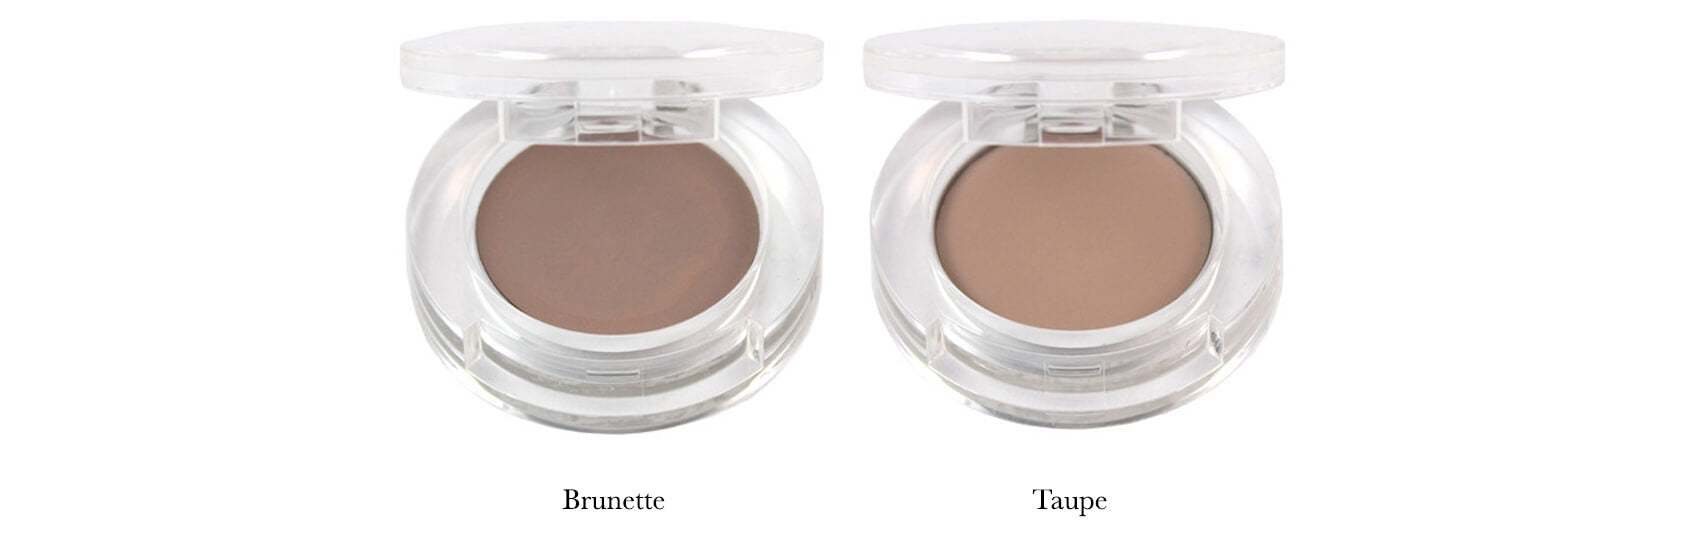 100% Pure Brunette and Taupe Powder